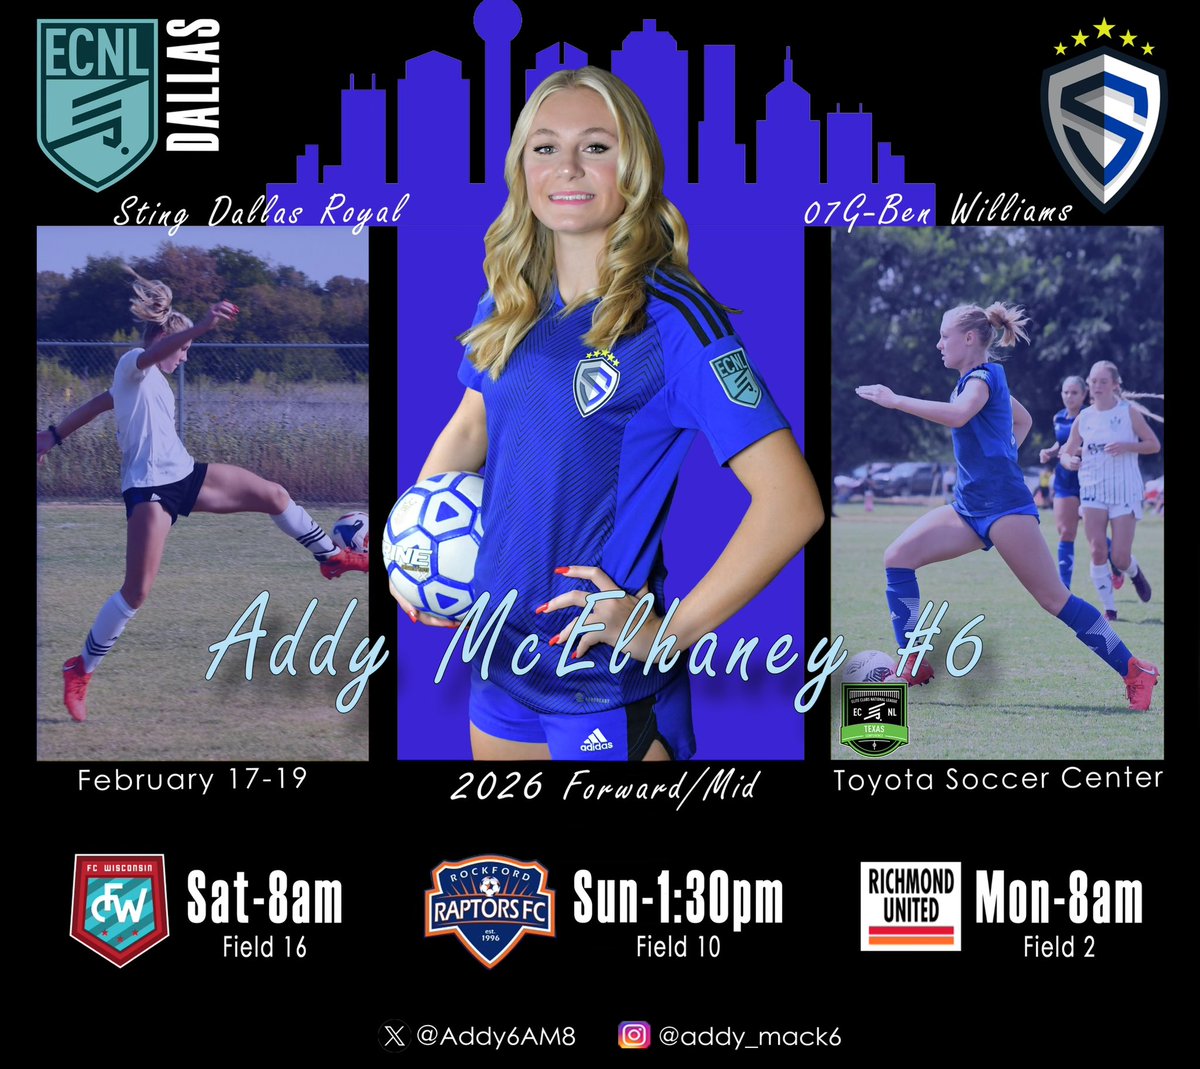 Come support Sting Royal this coming weekend at the Dallas ECNL showcase!! Can’t wait to get back on the field #soccerwire #soccerecnl #ecnlgirls #collegesoccer